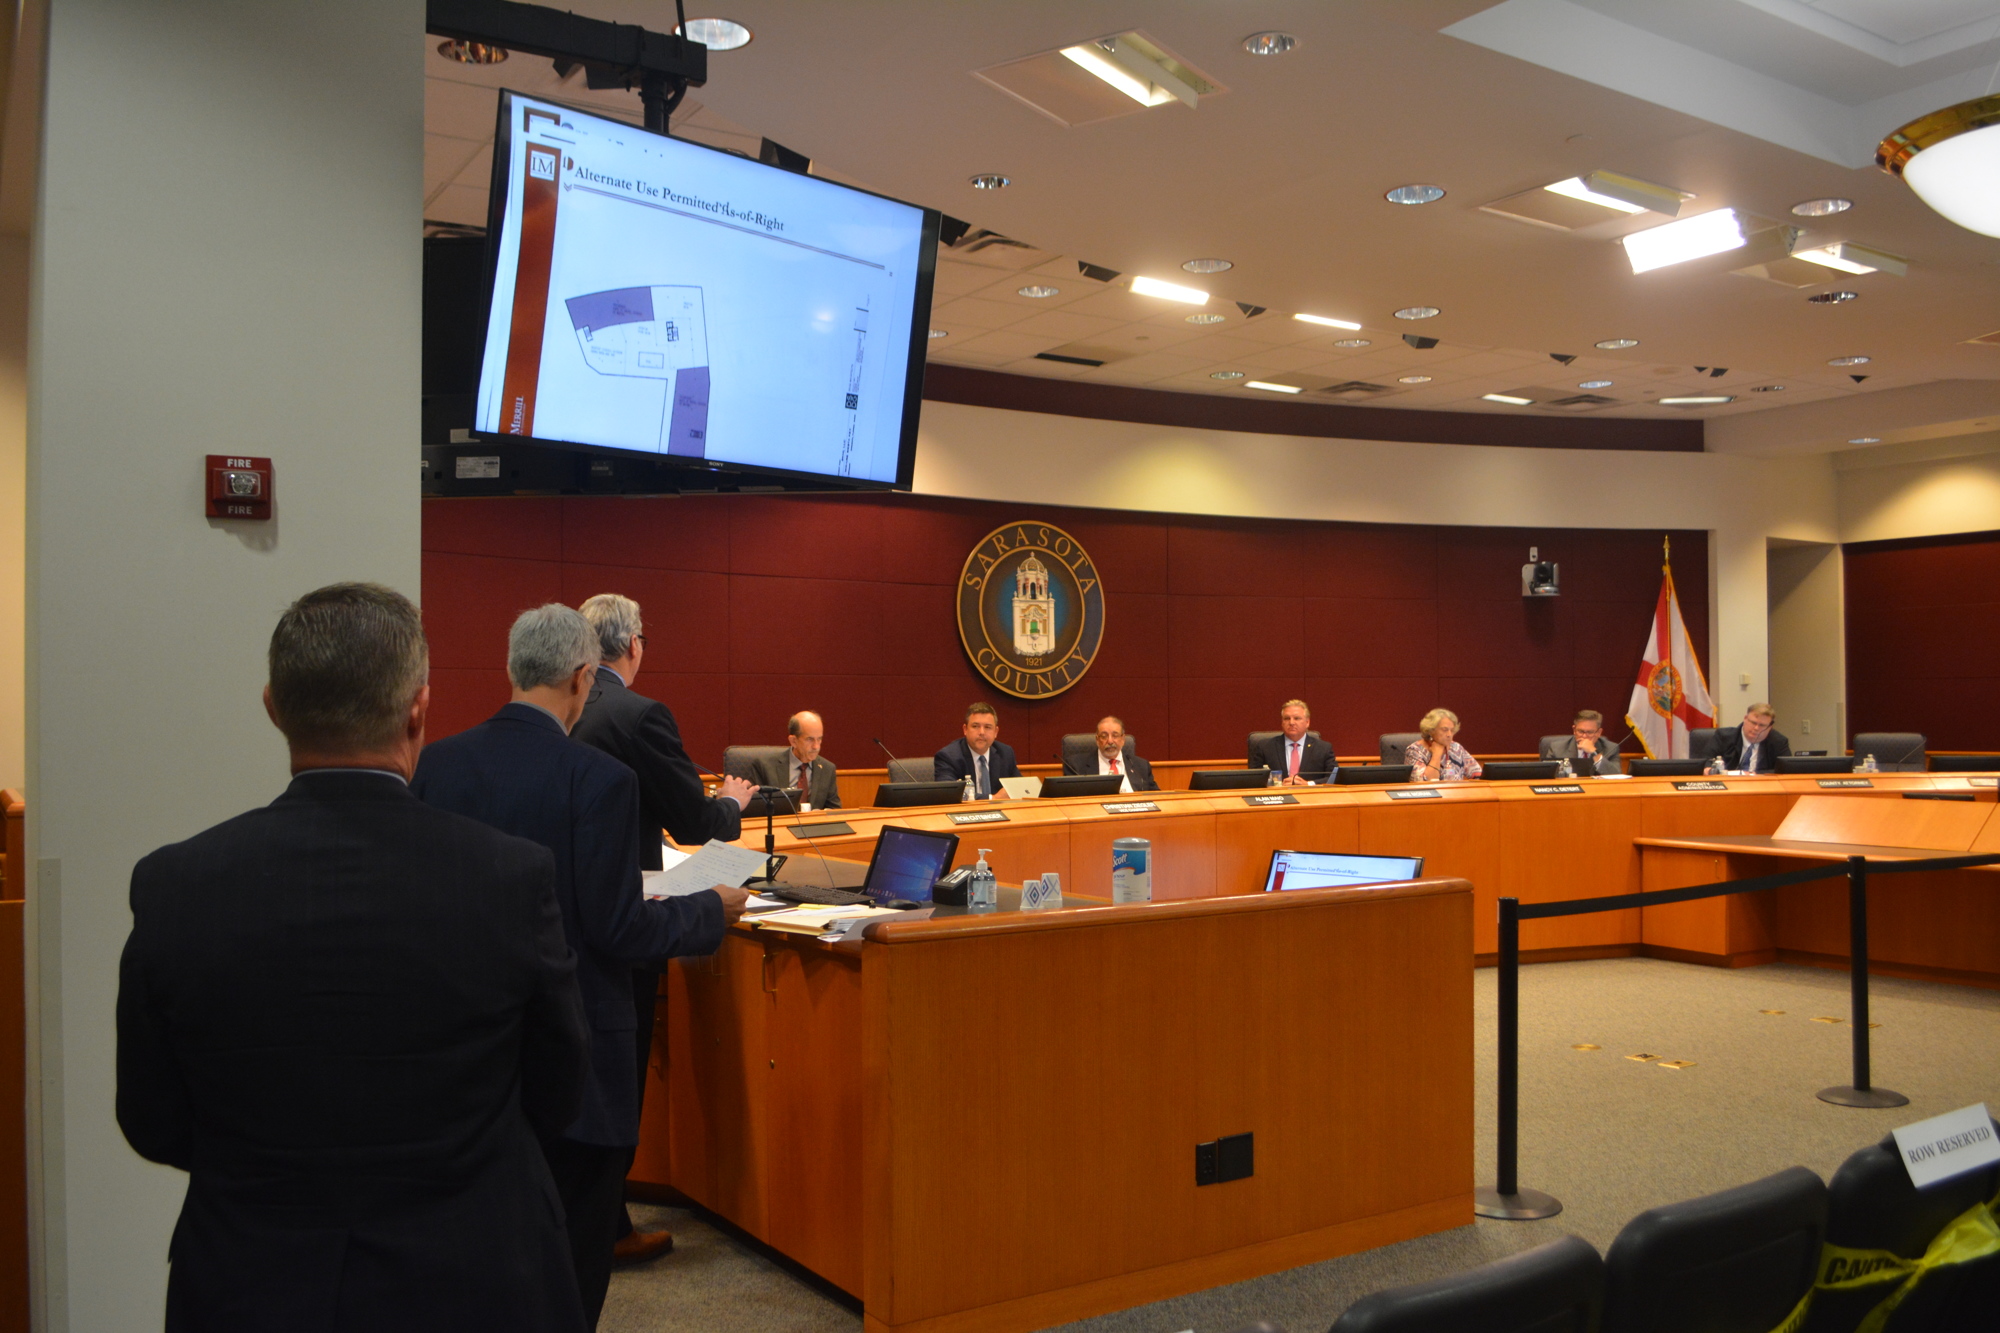 Bill Merrill, a land use attorney representing the developer, argued Wednesday that a hotel represented a less intensive project than some uses allowed by right on the Siesta Key property.